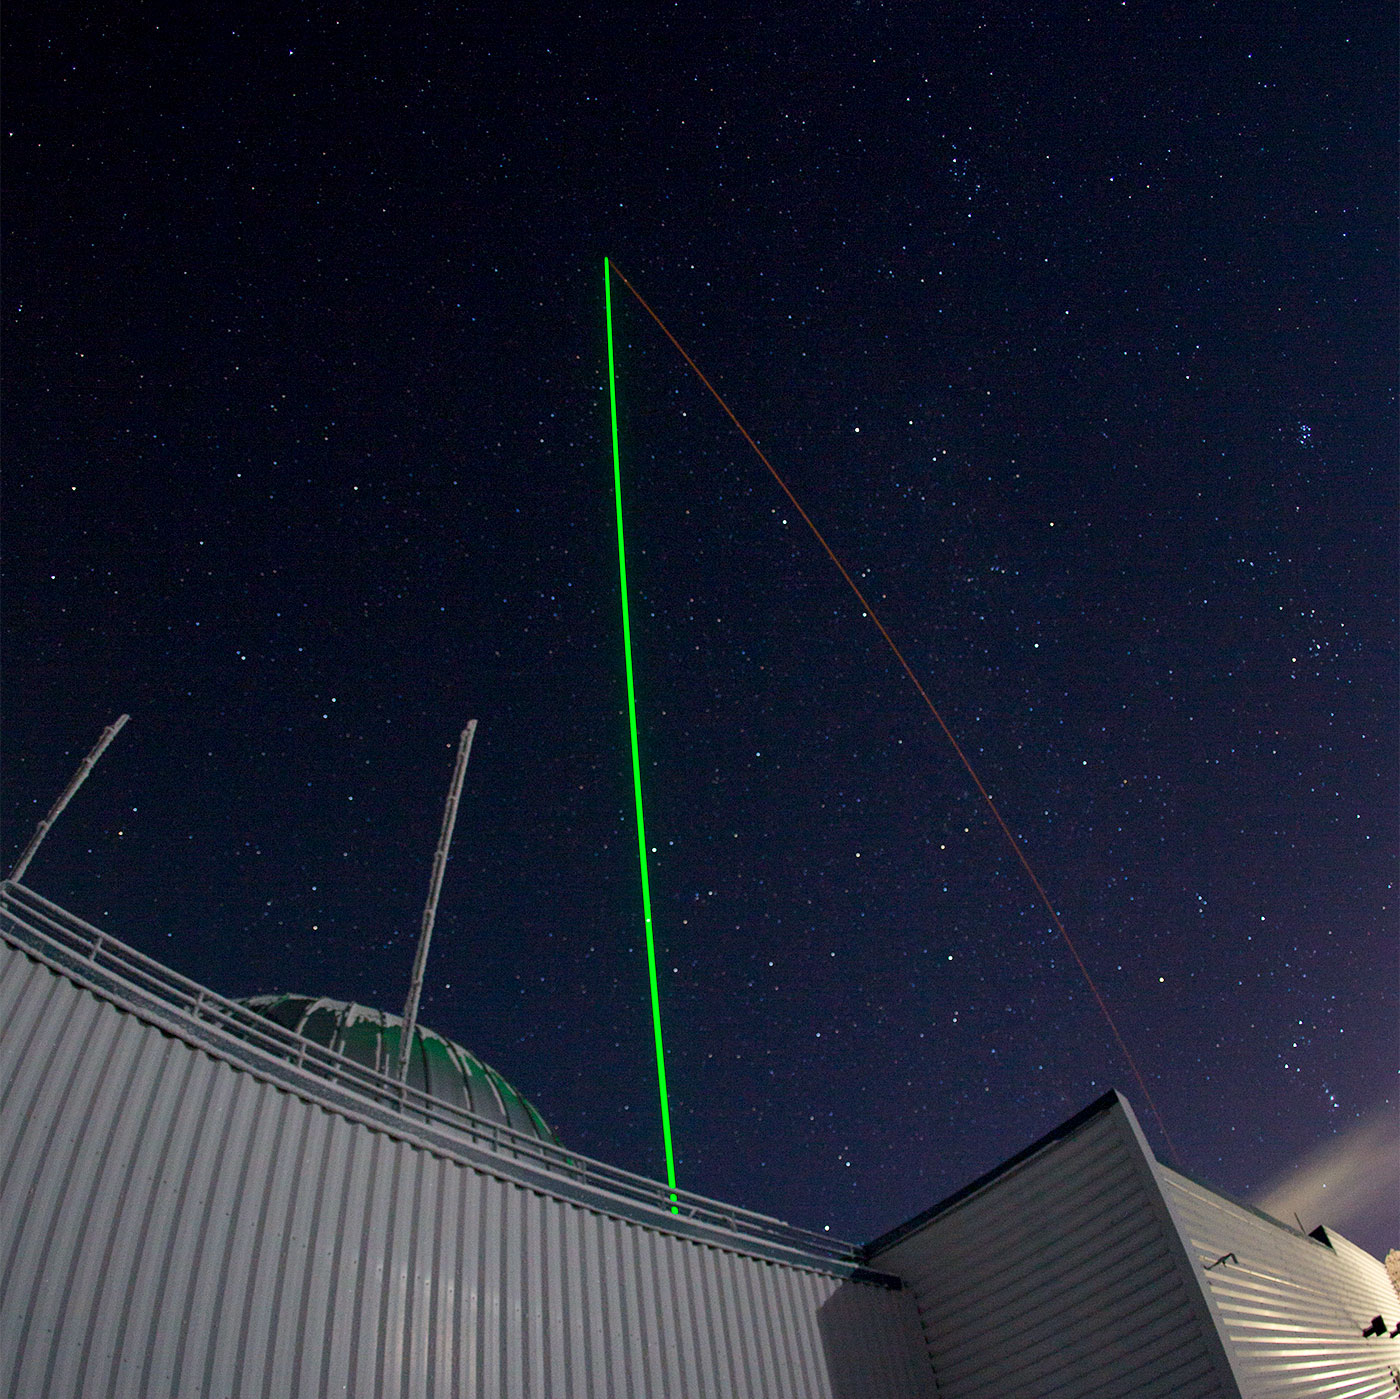 A lidar beam, consisting of a laser and radar, shoots 50 miles into the stratosphere to help monitor conditions before a rocket launch at UAF’s Poker Flat Research Range about 30 miles north of Fairbanks in January 2015. UAF photo by Todd Paris